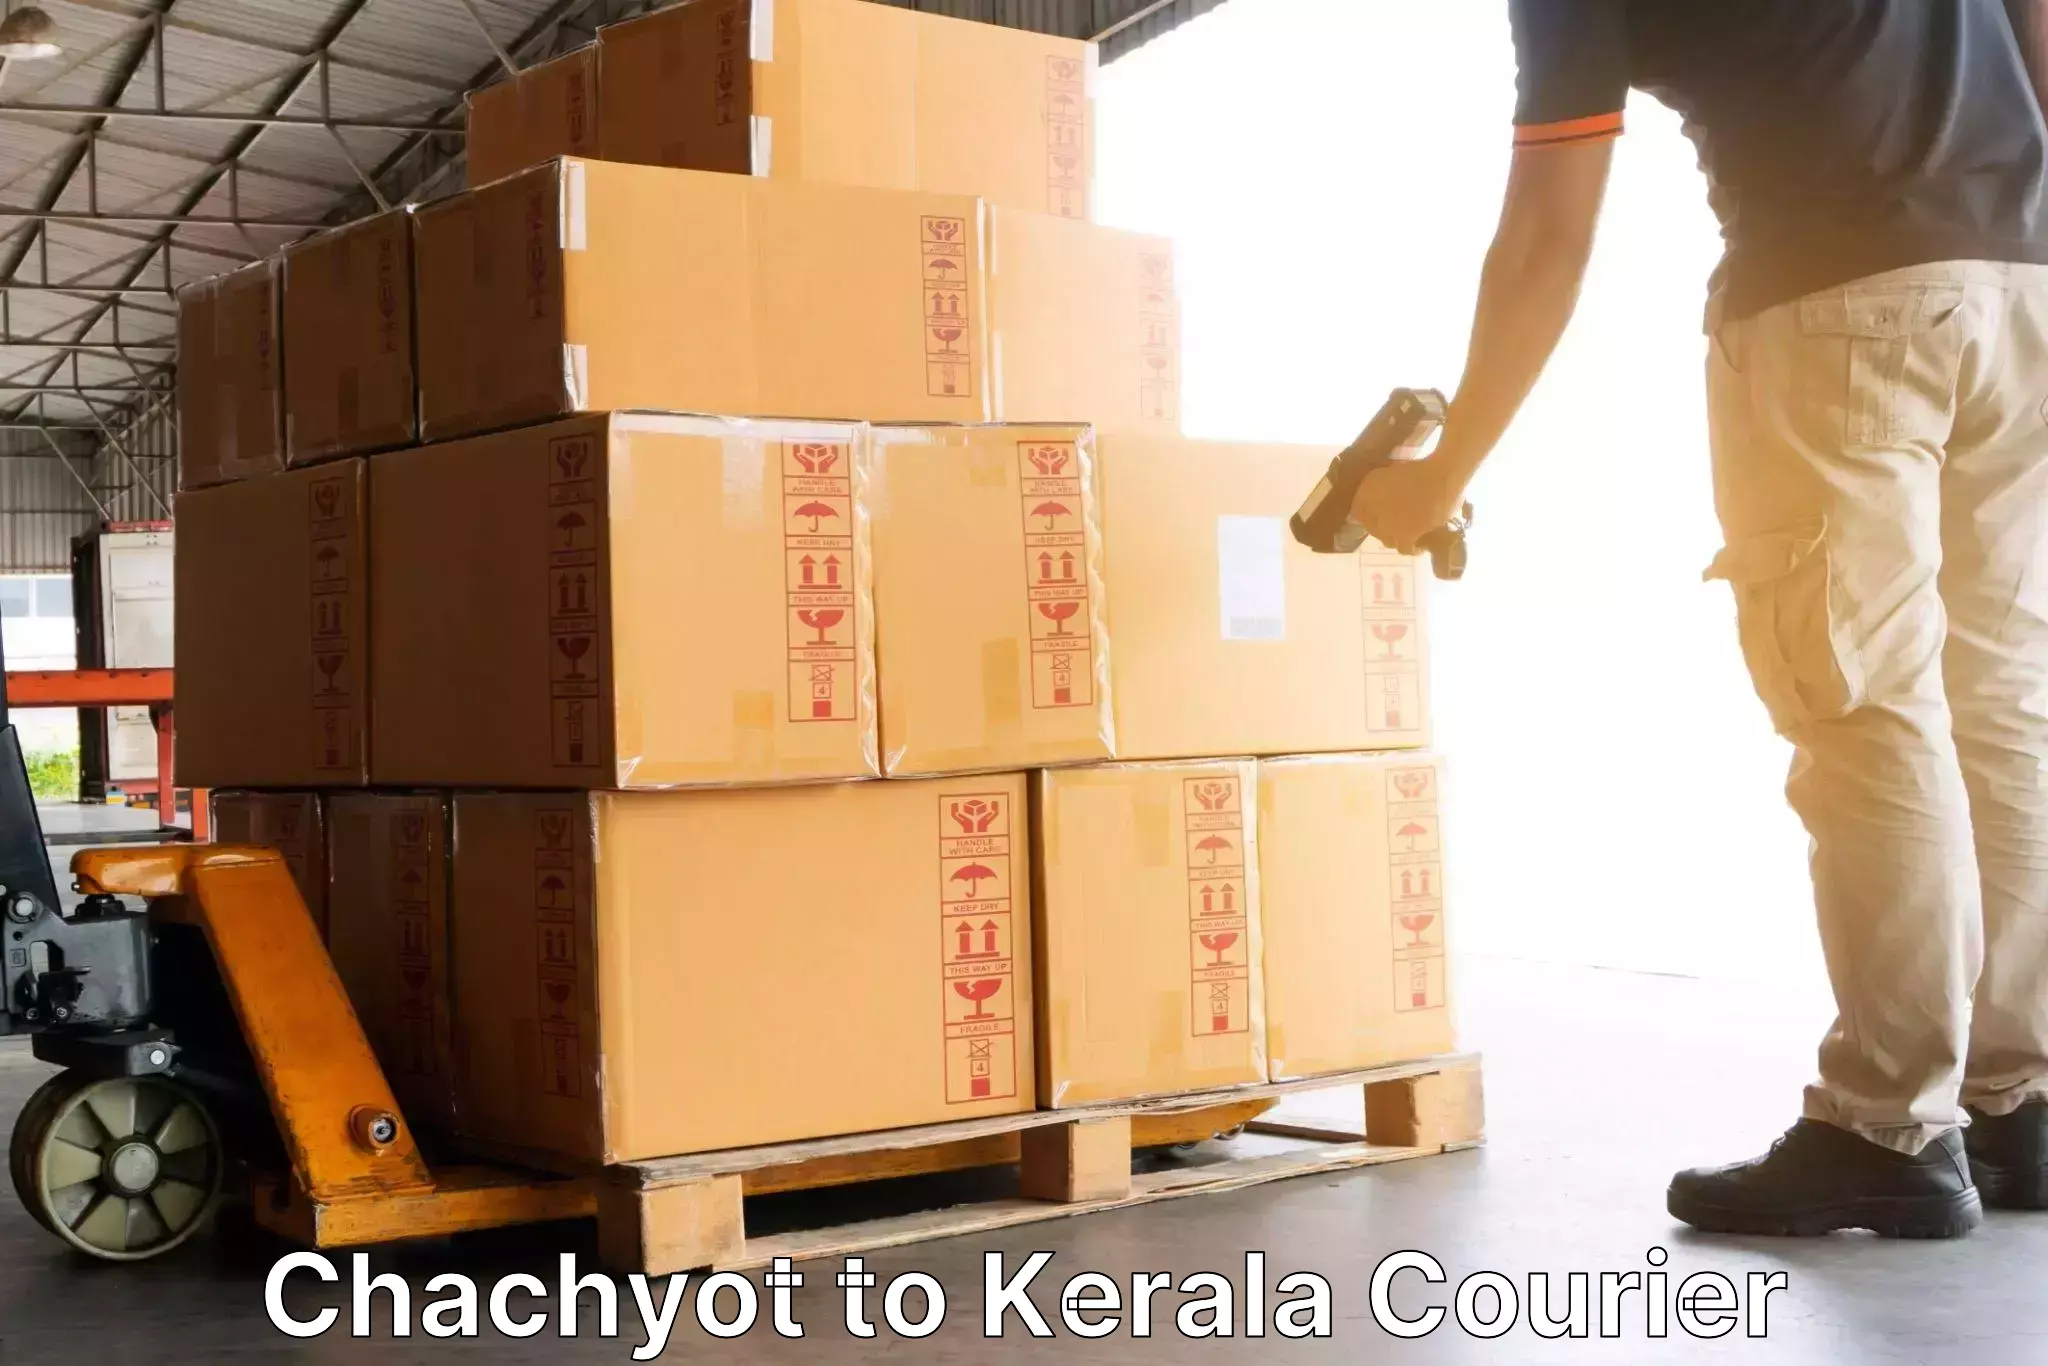 Modern delivery technologies in Chachyot to Cochin Port Kochi